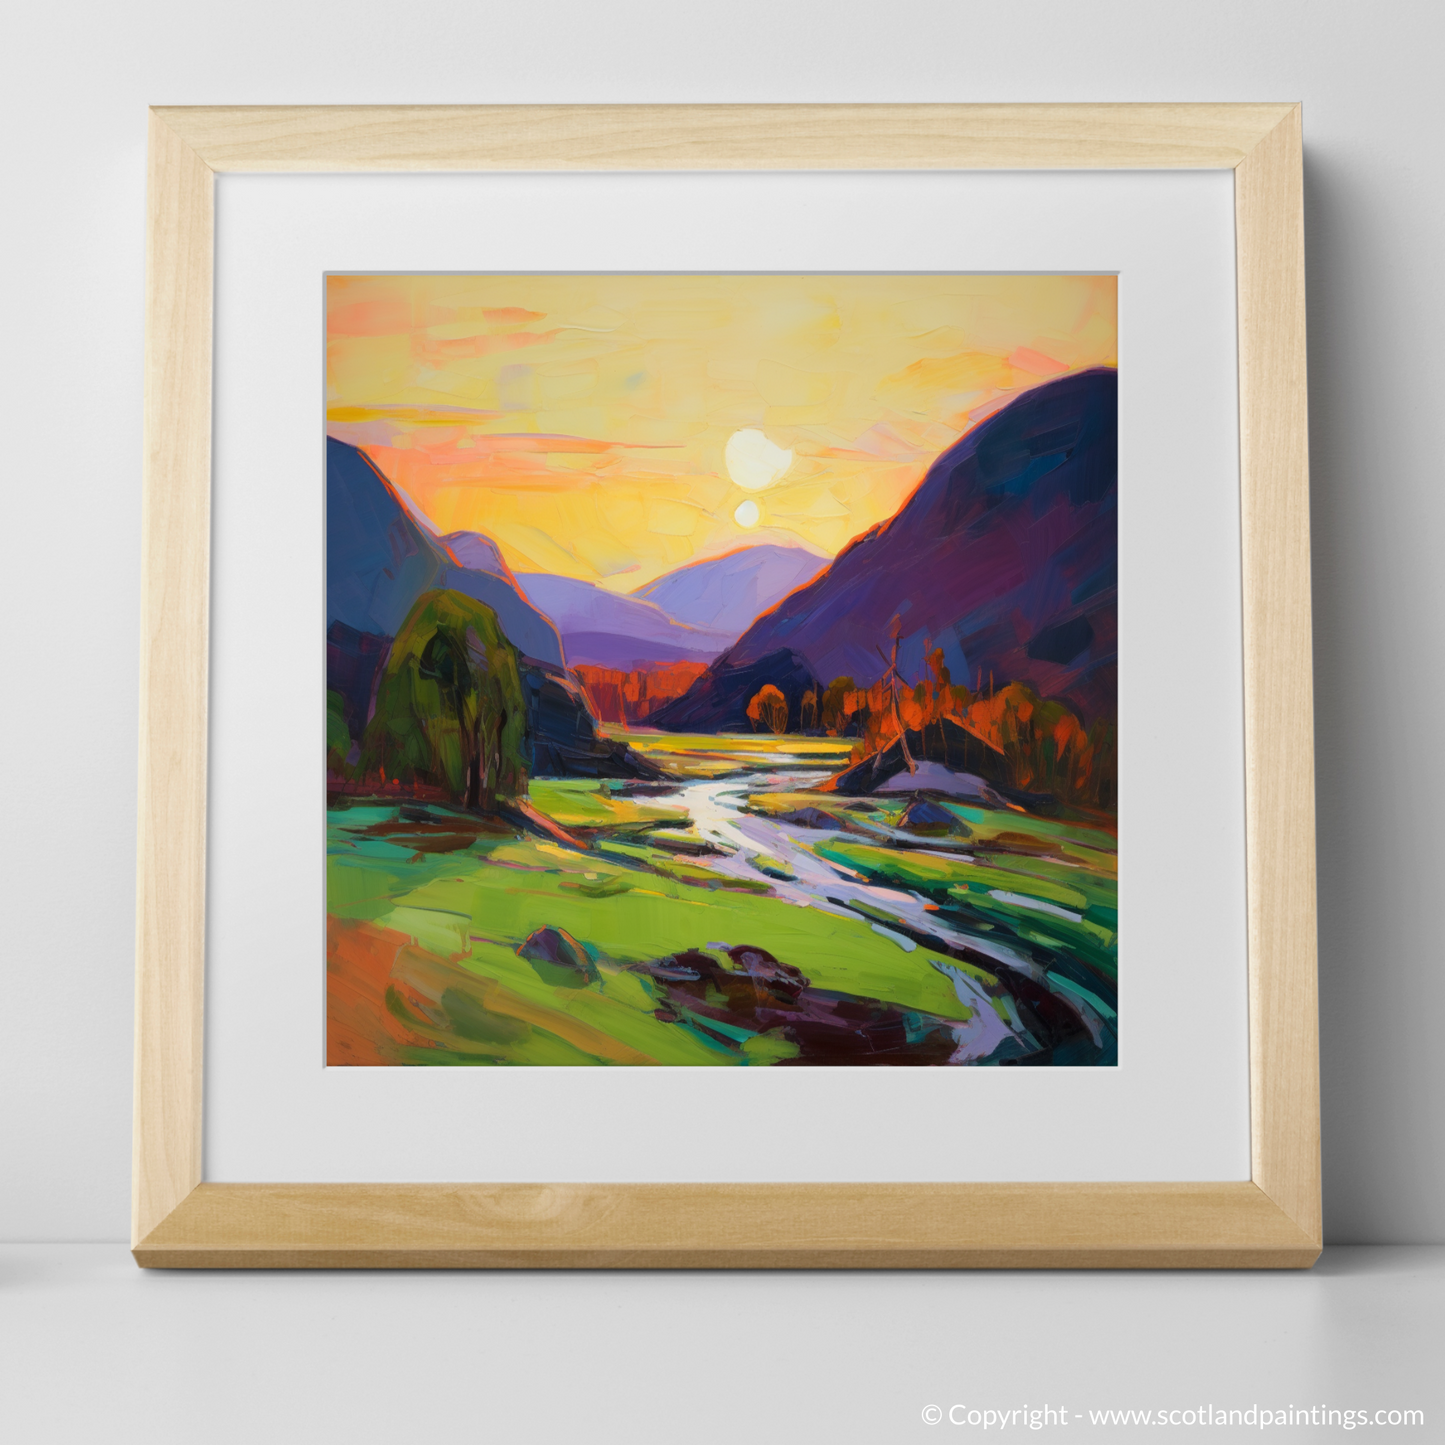 Verdant Glen at Sunset: An Expressionist Ode to Glencoe's Enchantment